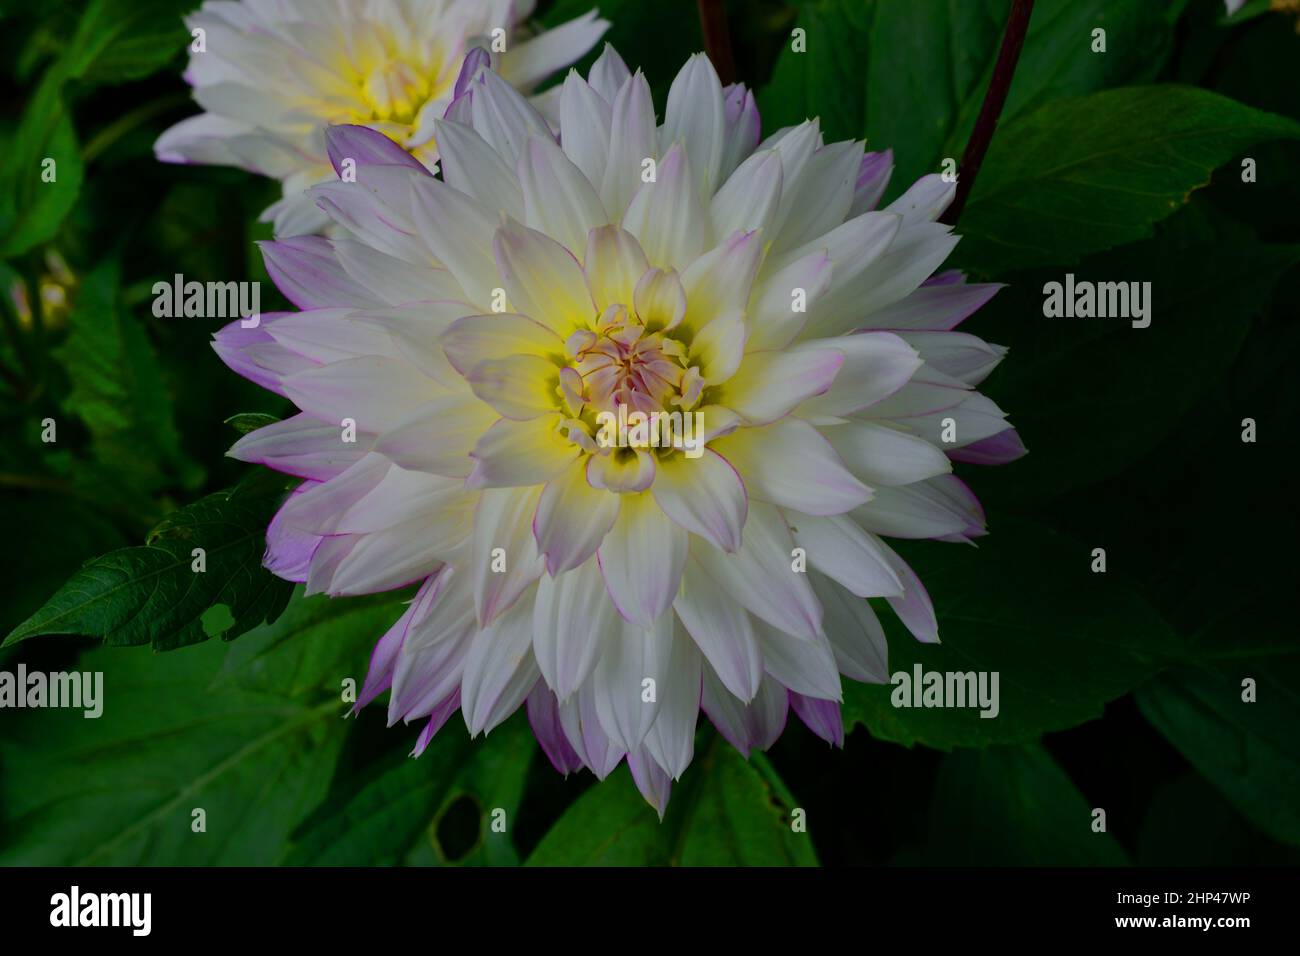 Dahlia decorative. name Crazy Love. Closeup of large flower with white petals fringed with purple tips and yellow the centre toward centre. Stock Photo